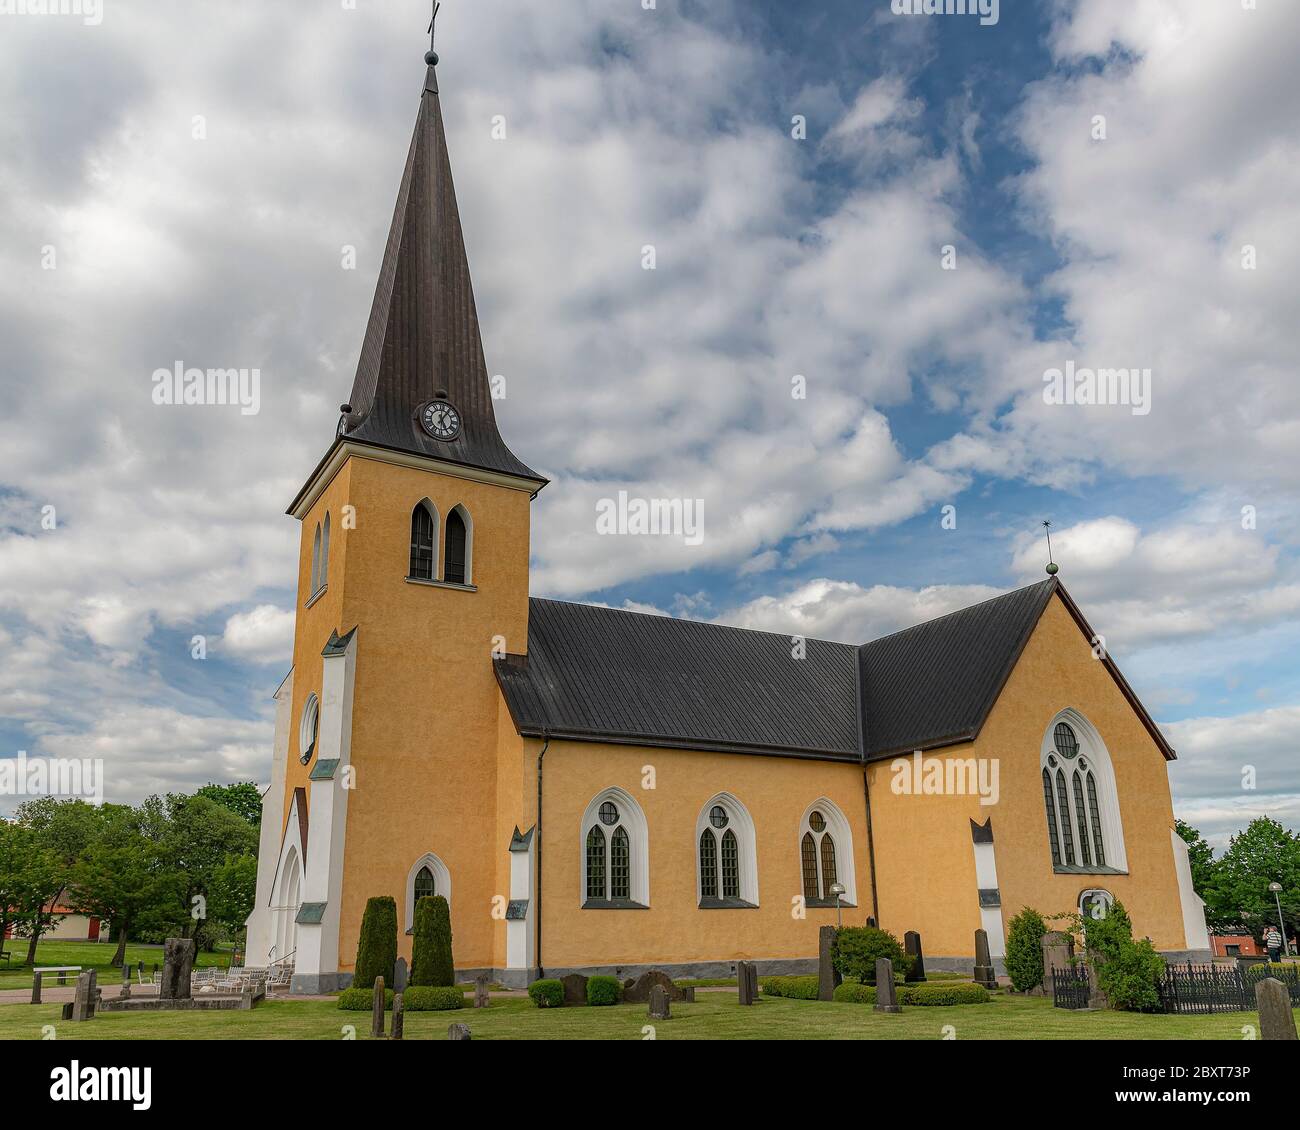 The Broby Church was built in the gothic revival style of architecture.. Stock Photo